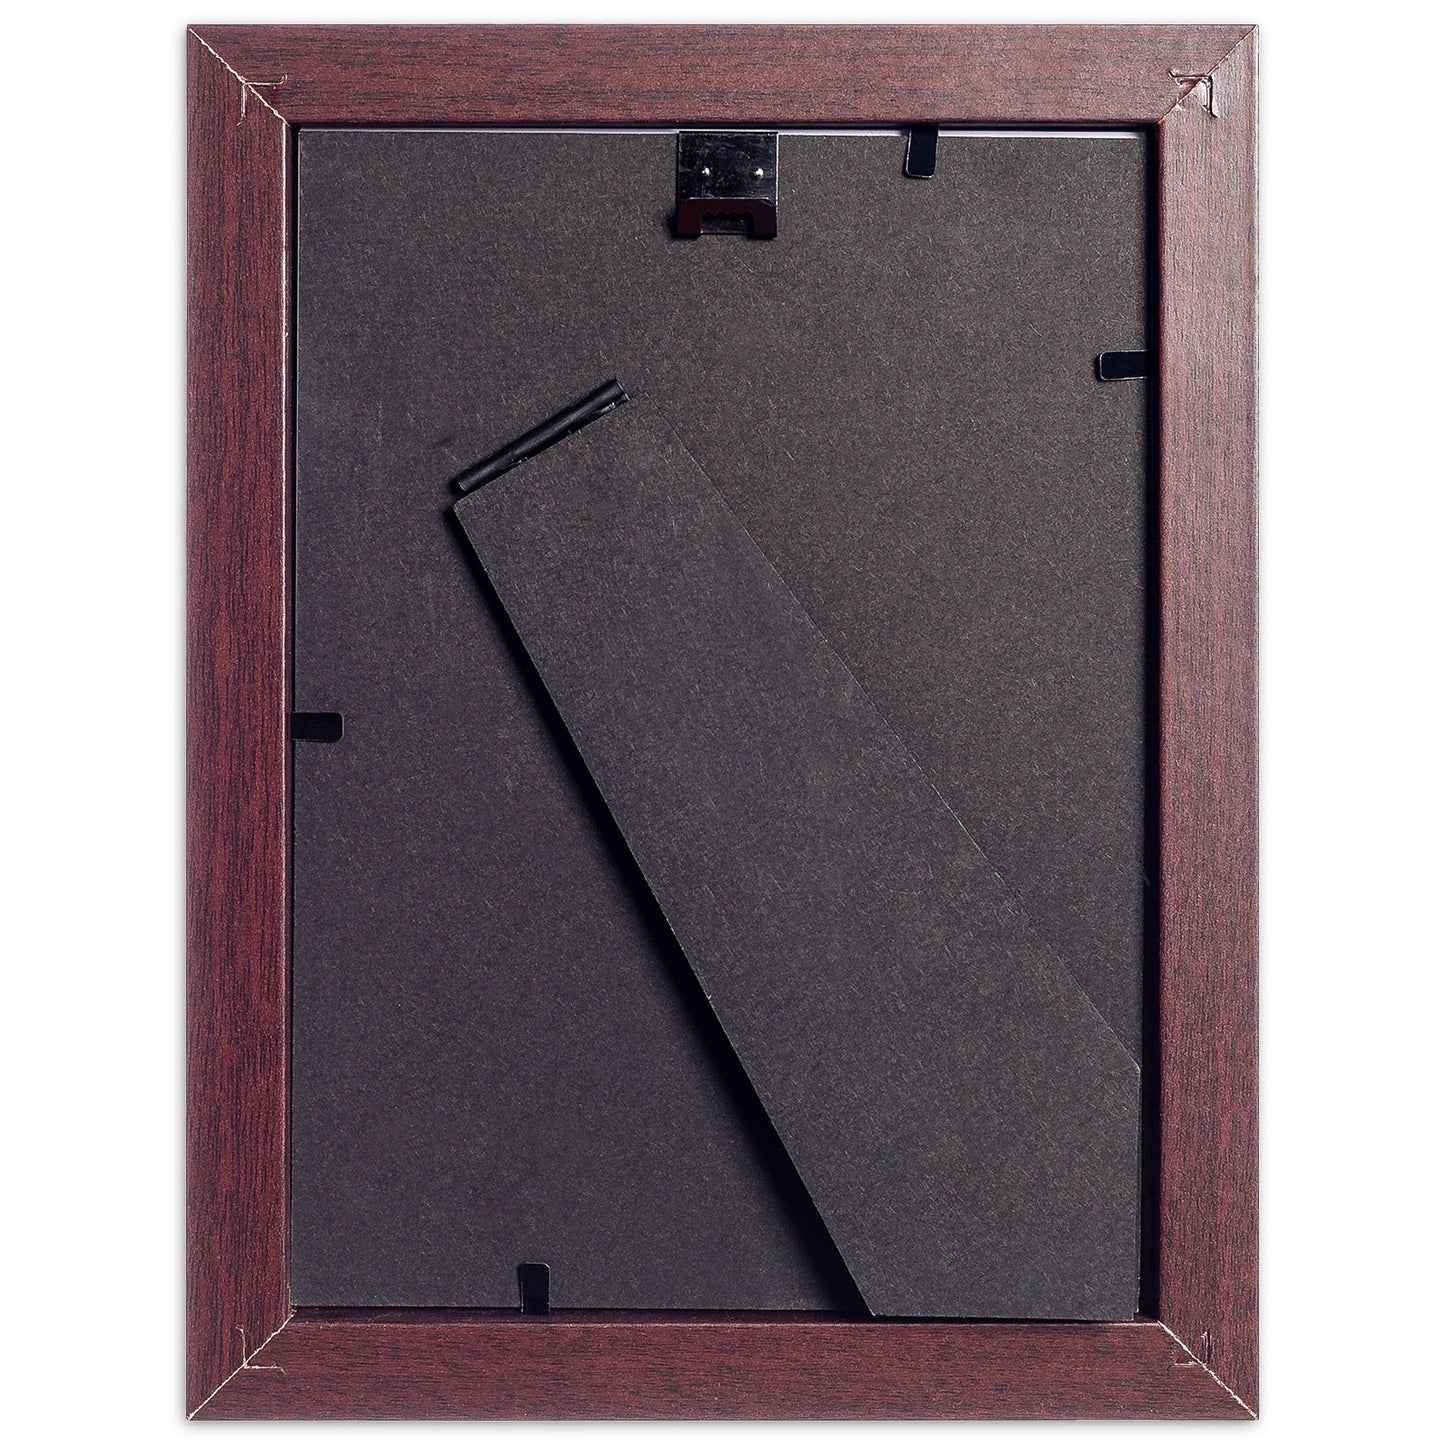 4" x 6” Classic Mahogany MDF Wood Picture Frame with Tempered Glass